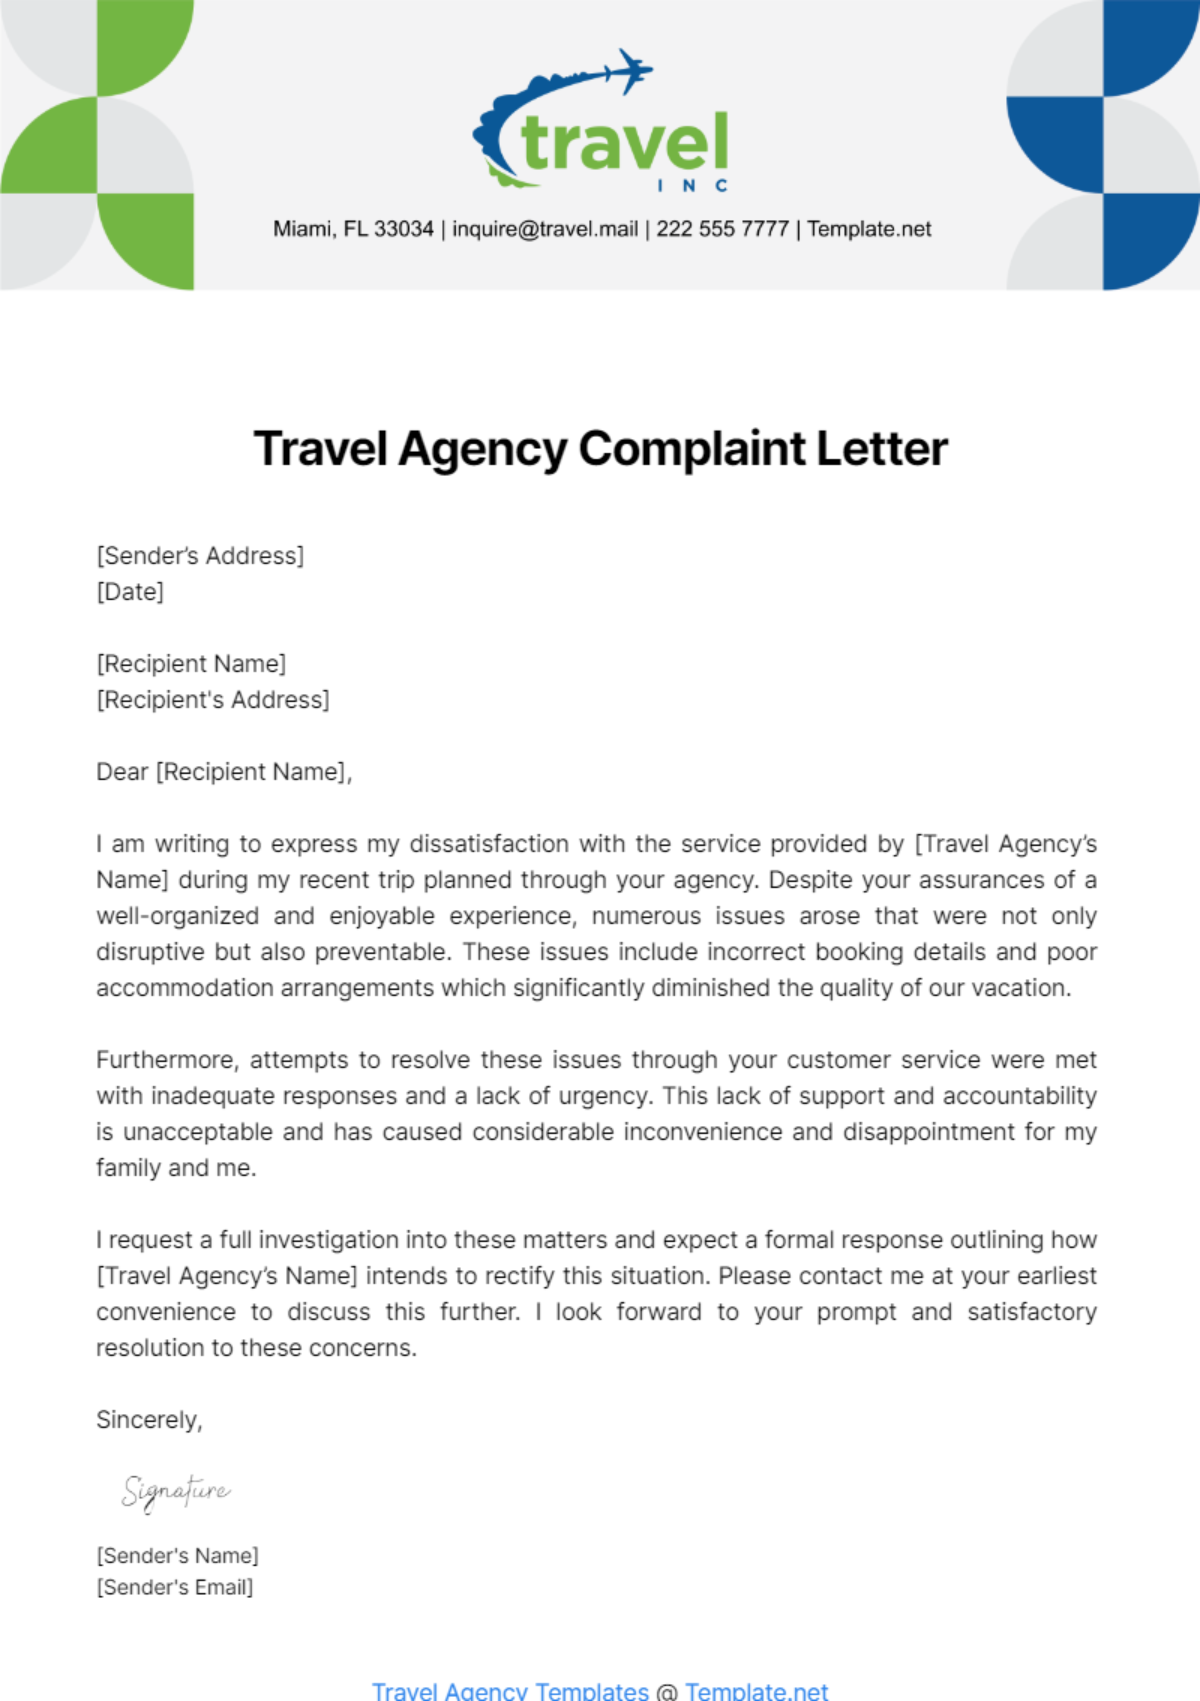 Travel Agency Complaint Letter Template